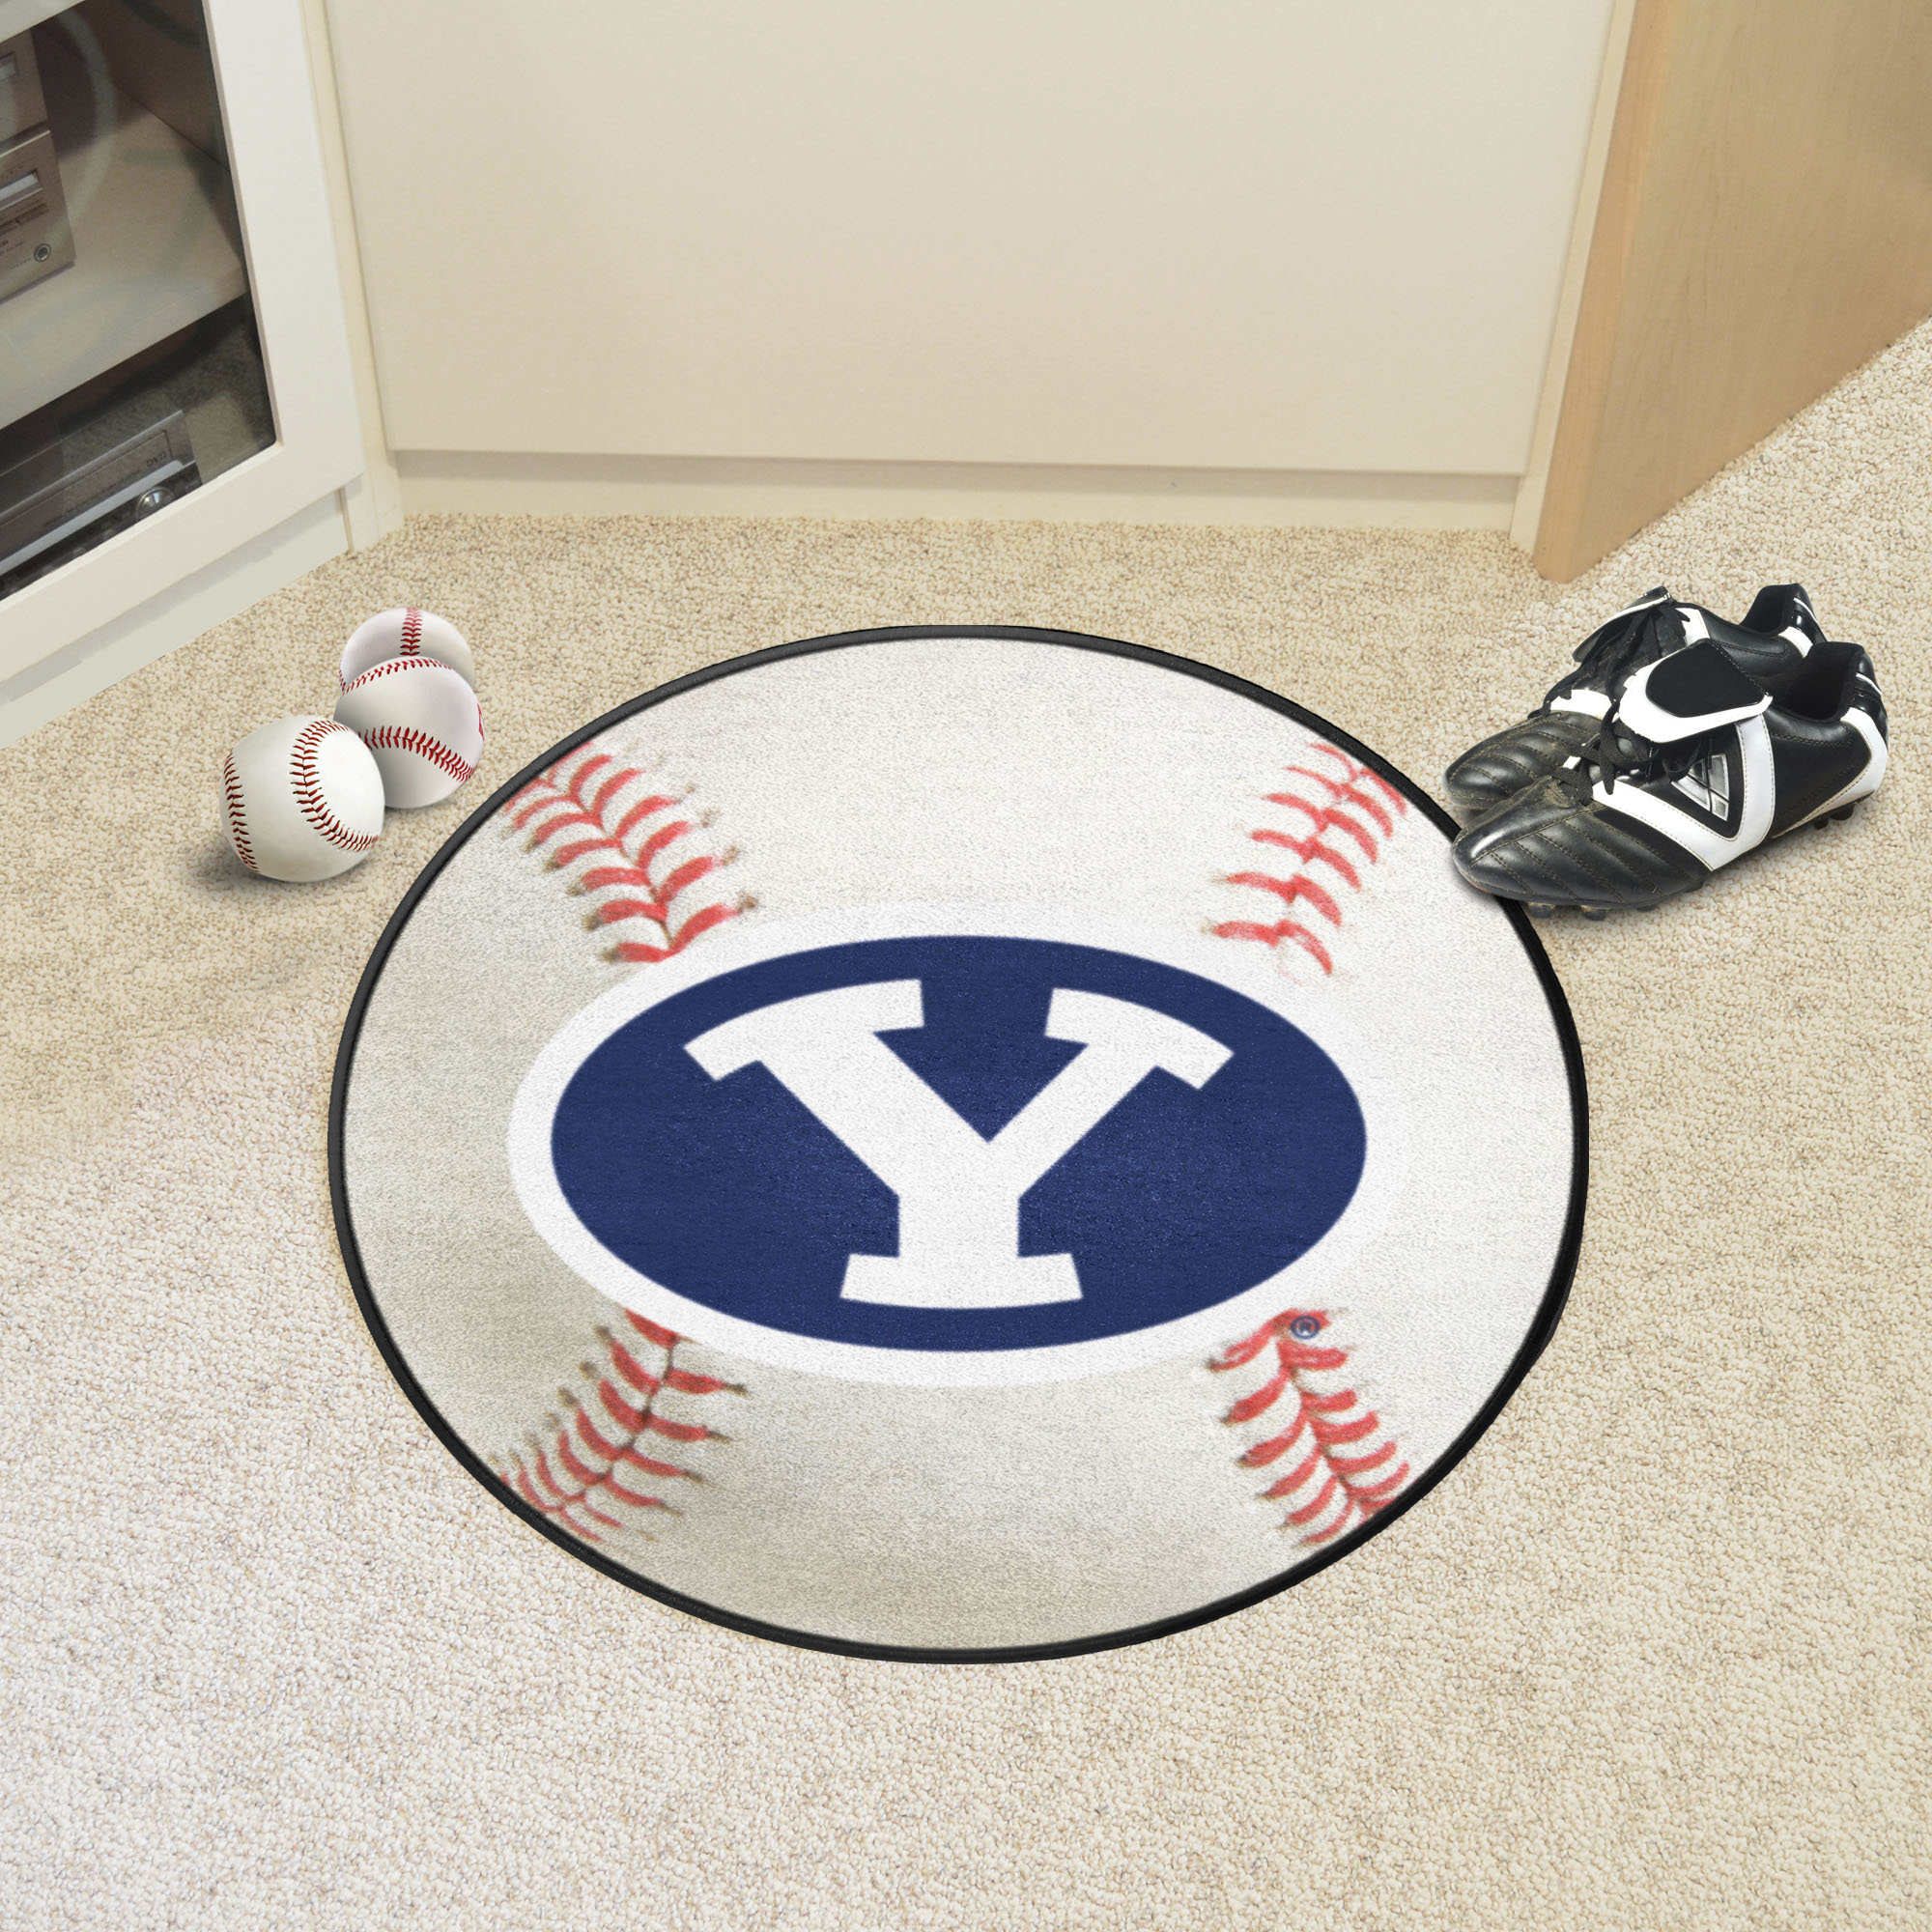 Brigham Young University Ball Shaped Area Rugs (Ball Shaped Area Rugs: Baseball)